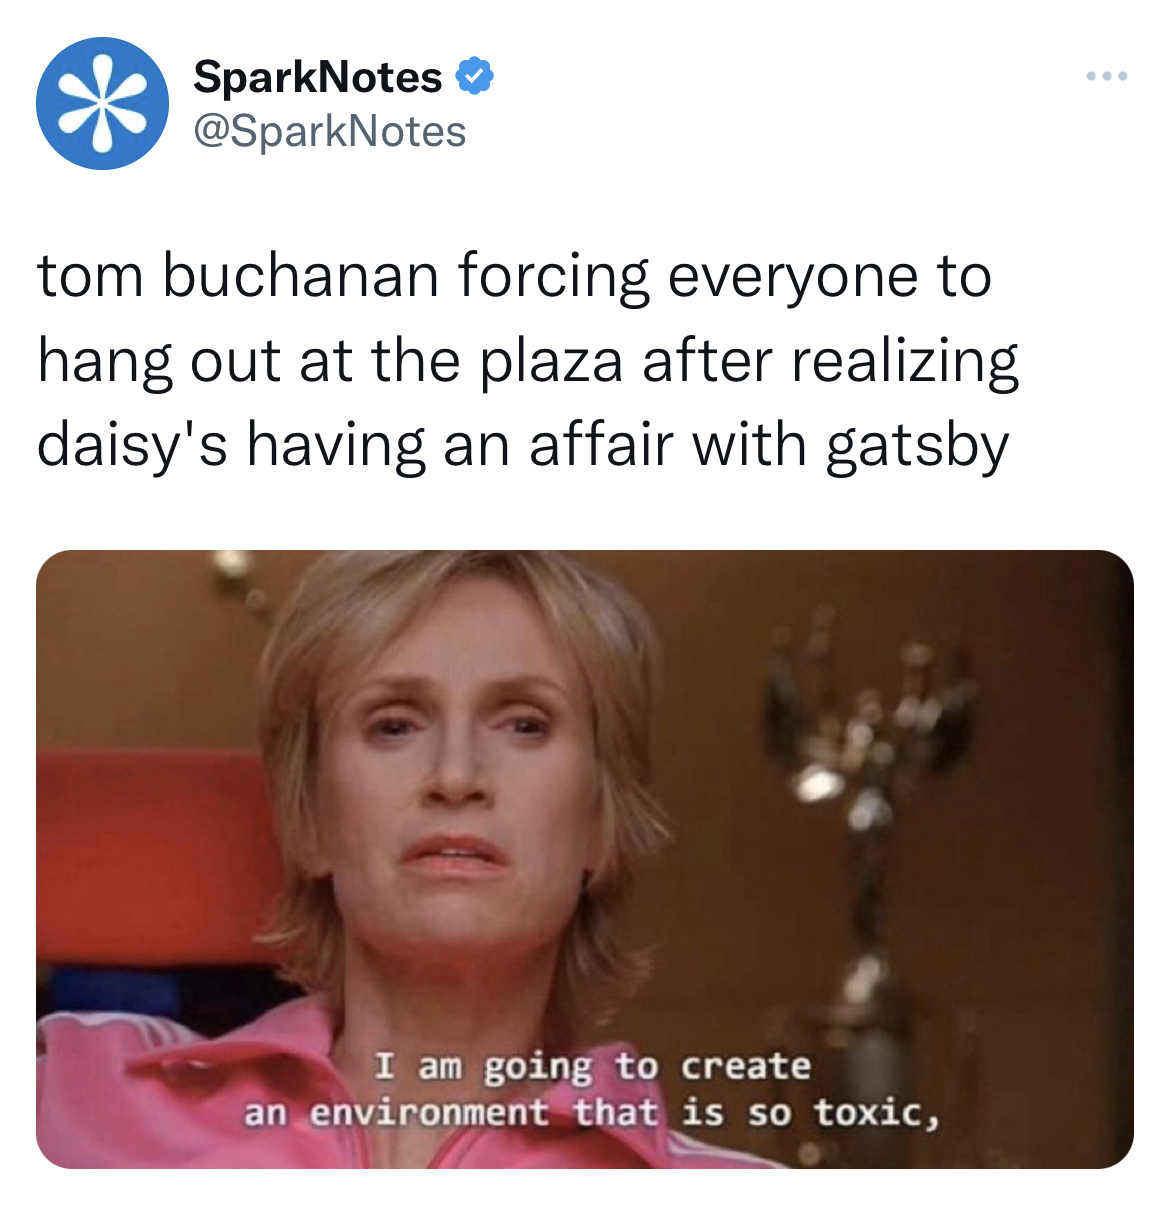 deranged tweets - bachelor memes - SparkNotes tom buchanan forcing everyone to hang out at the plaza after realizing daisy's having an affair with gatsby I am going to create an environment that is so toxic,